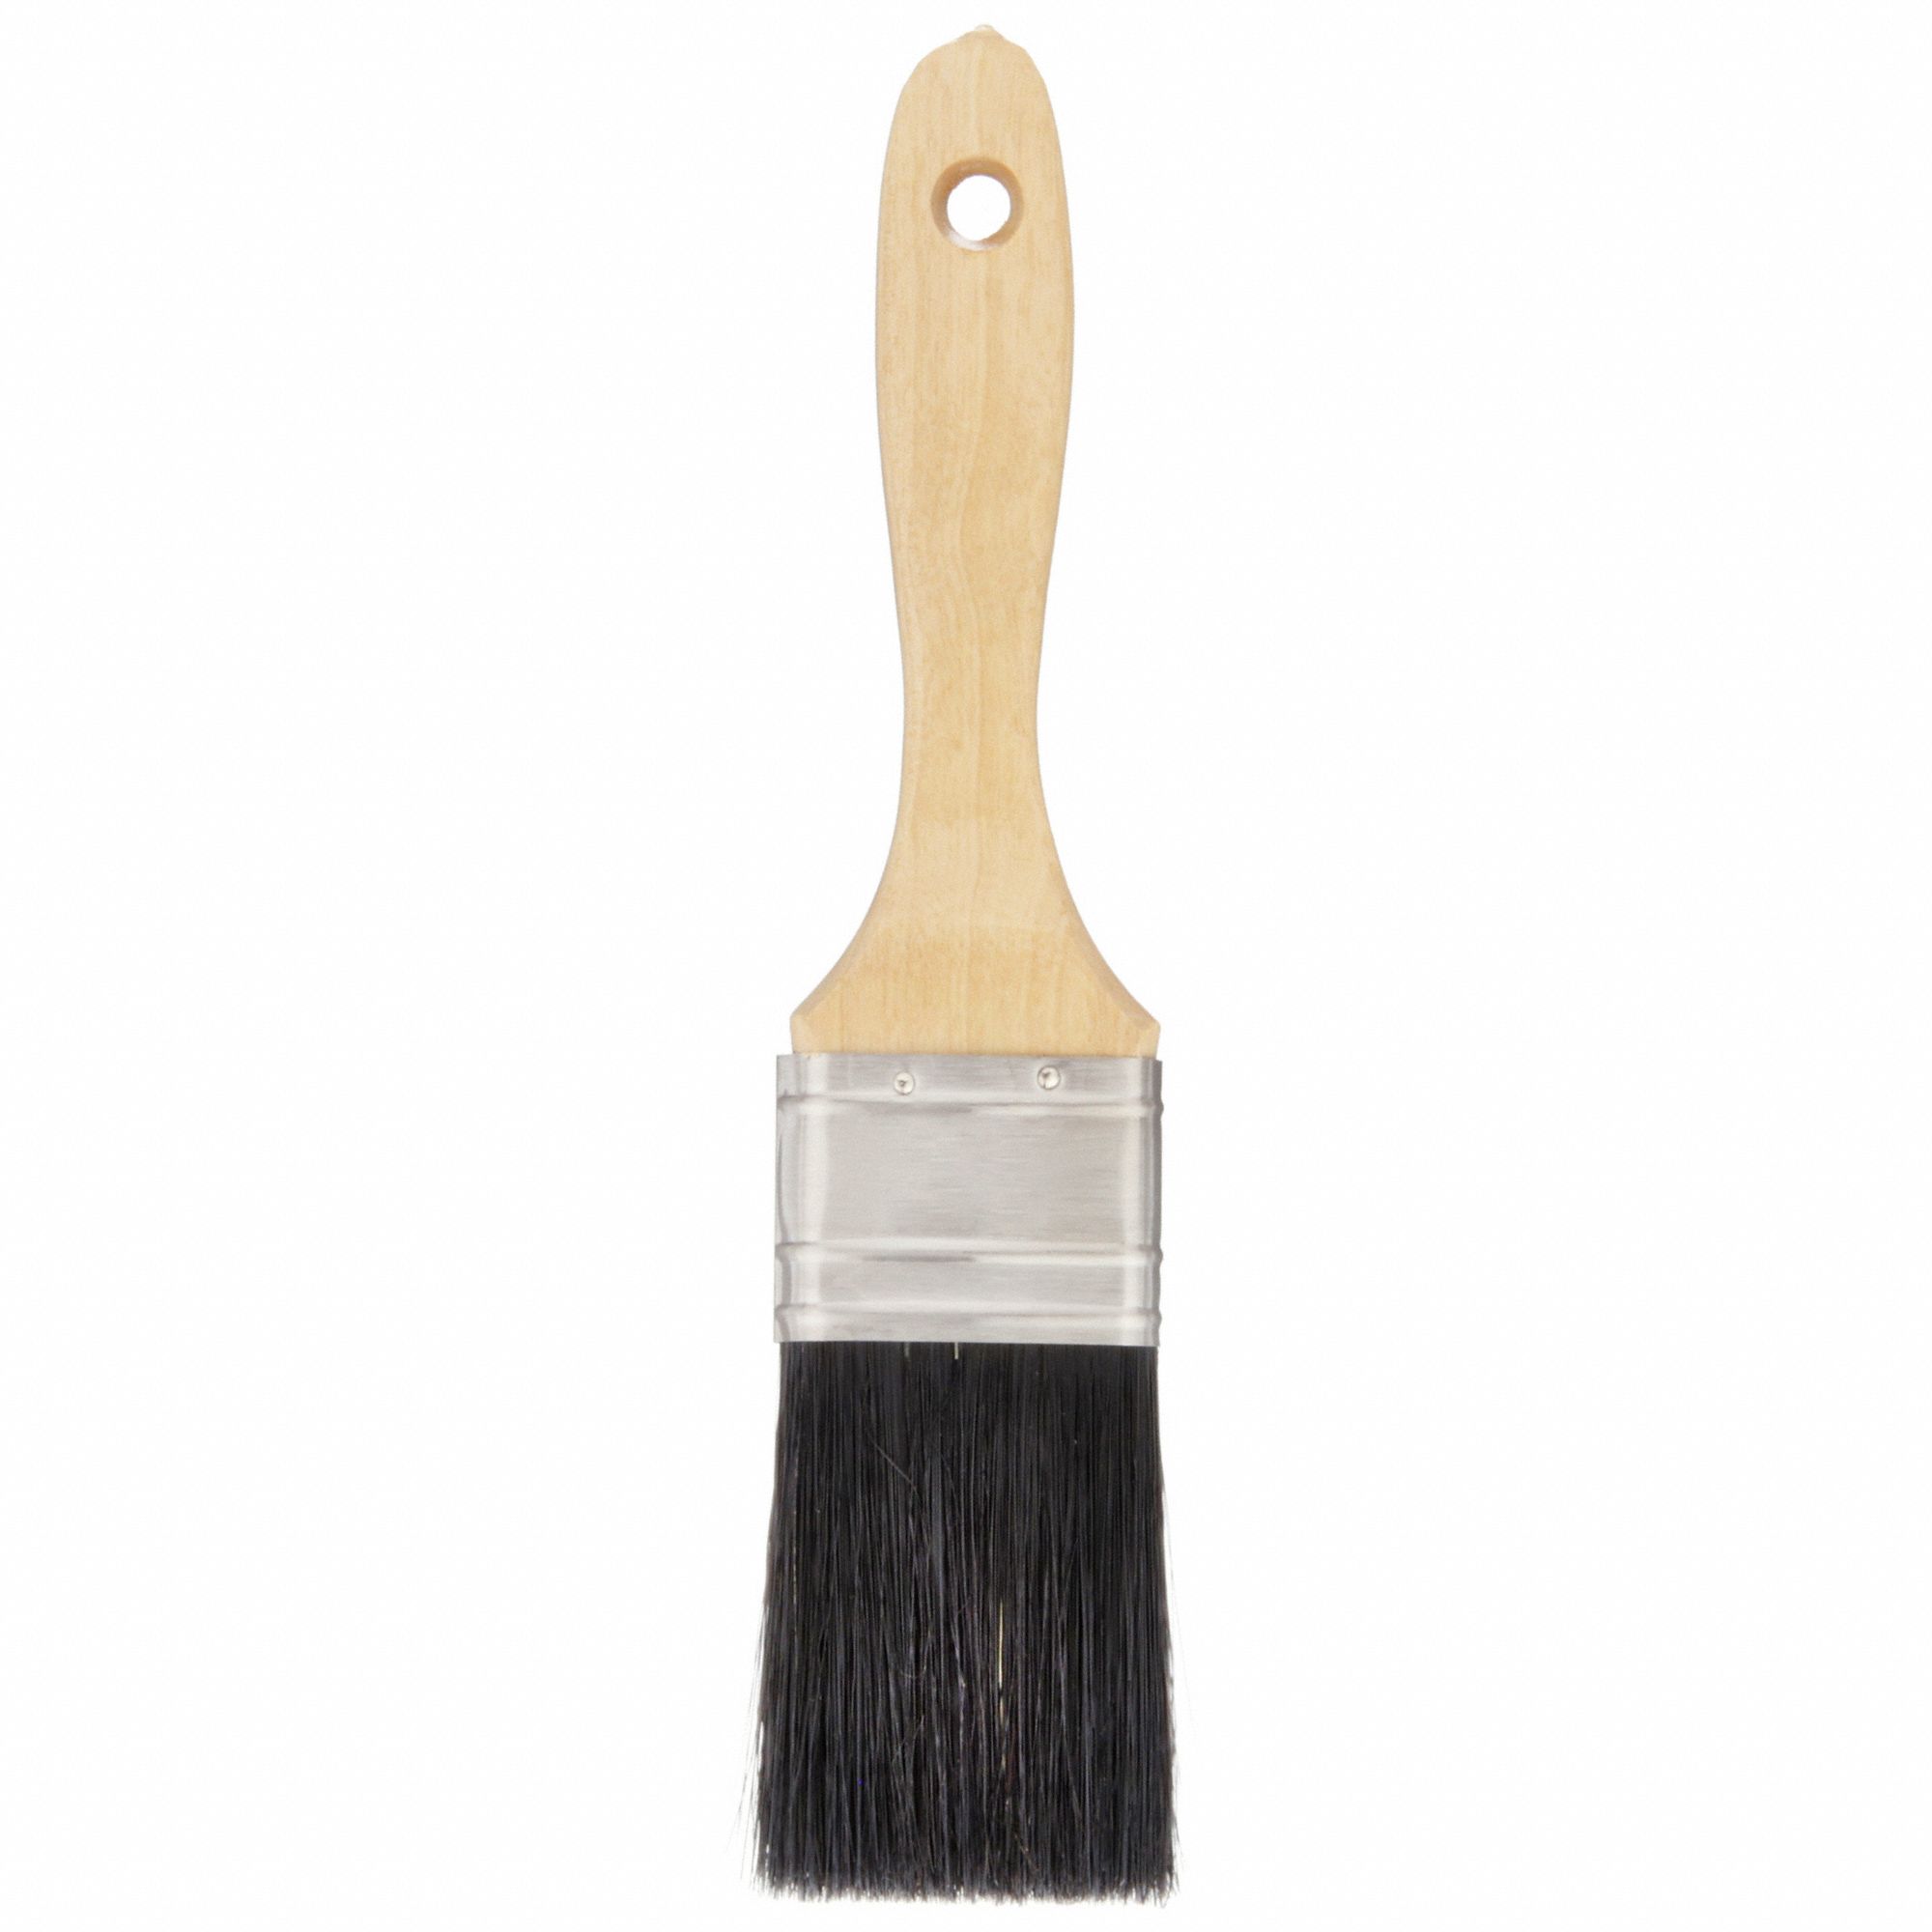 How to Choose the Right Paint Brush or Roller for the Job - Grainger KnowHow